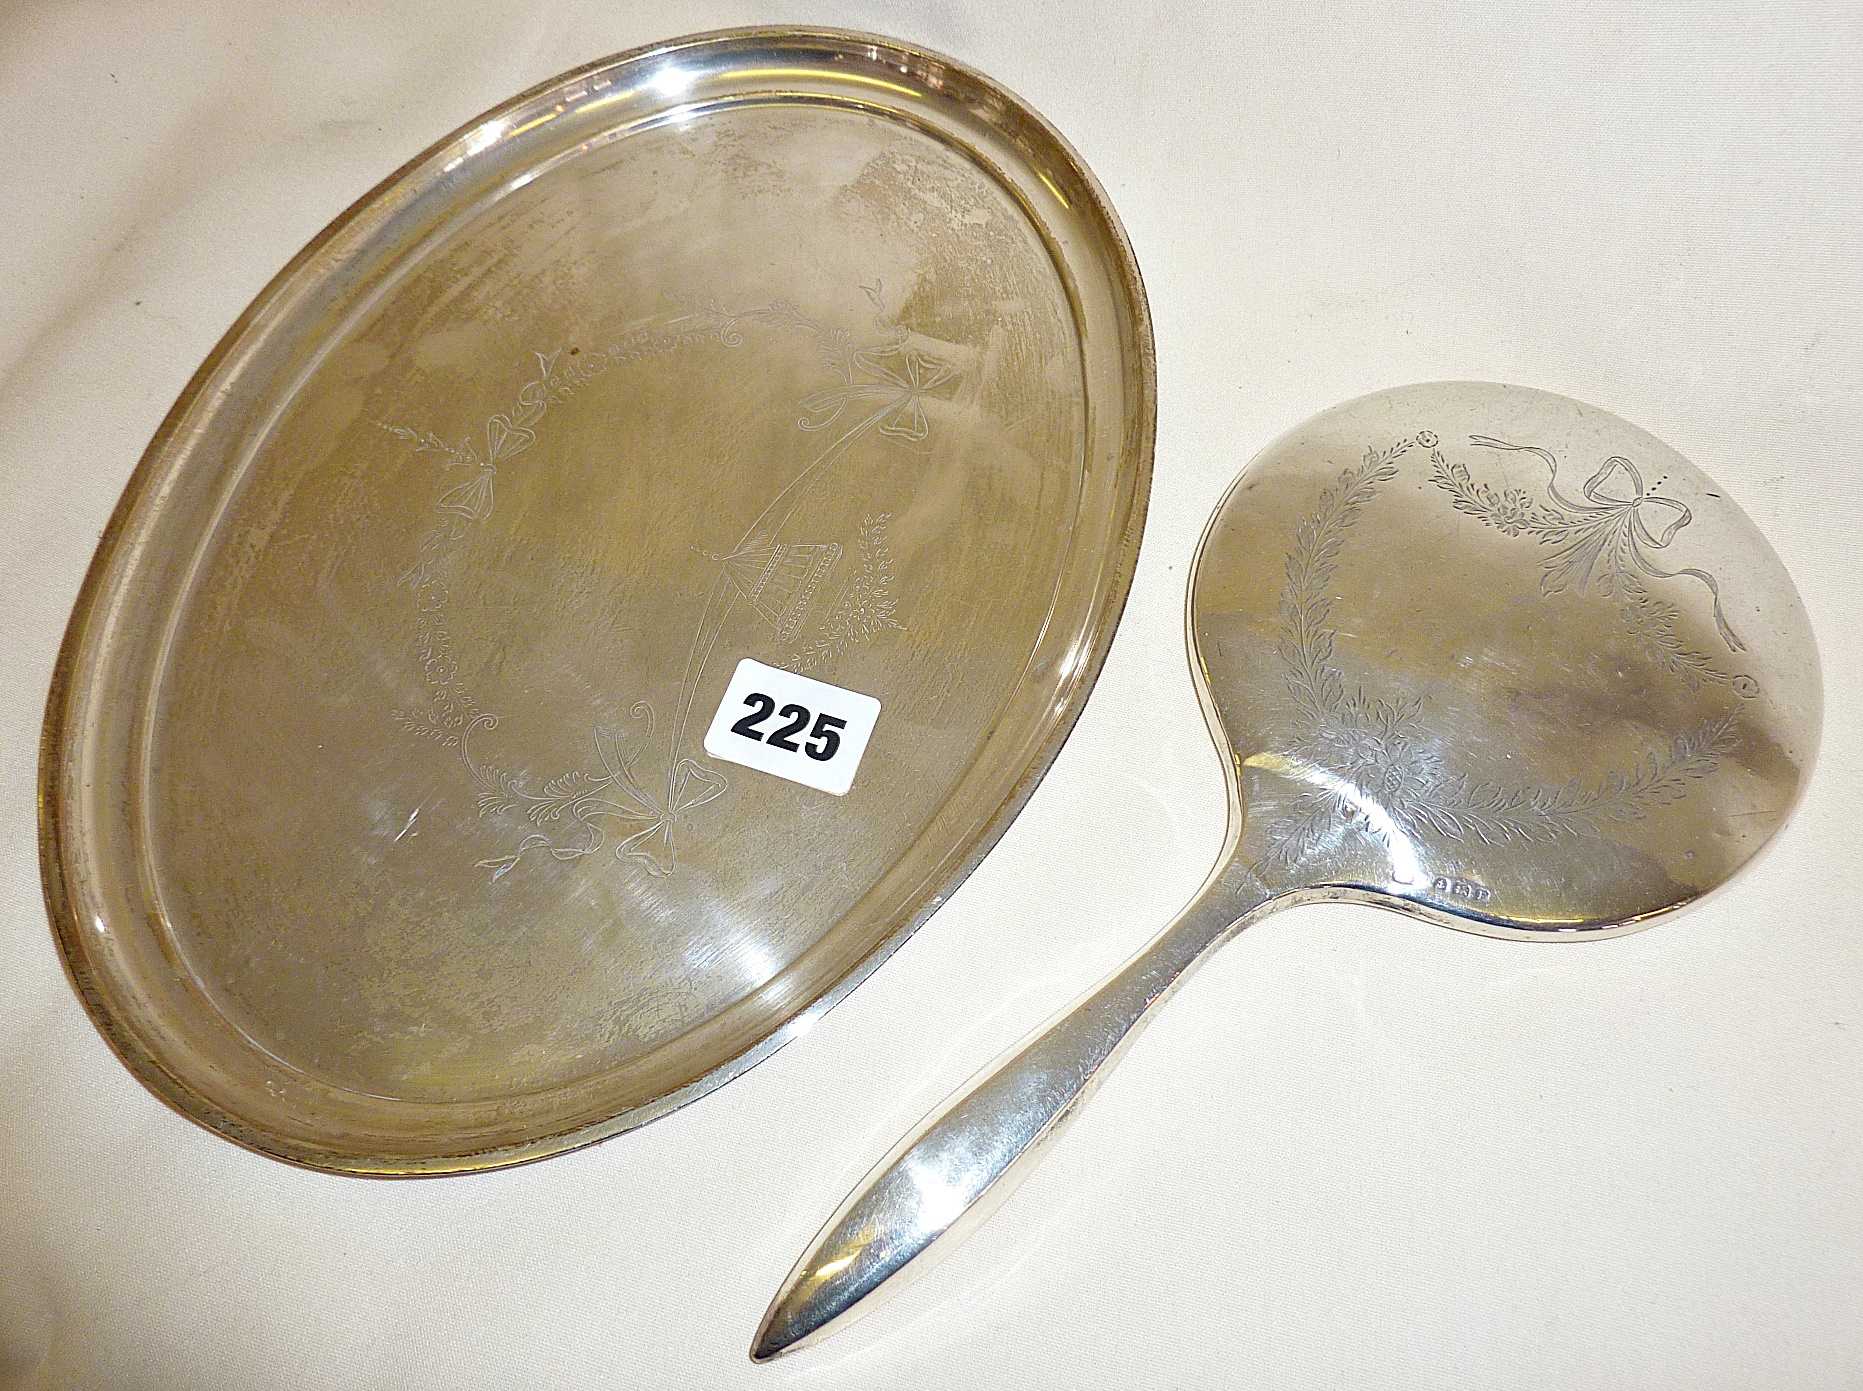 Hallmarked oval silver tray - Birmingham 1916 by Synyer & Beddoes together with a silver backed hand